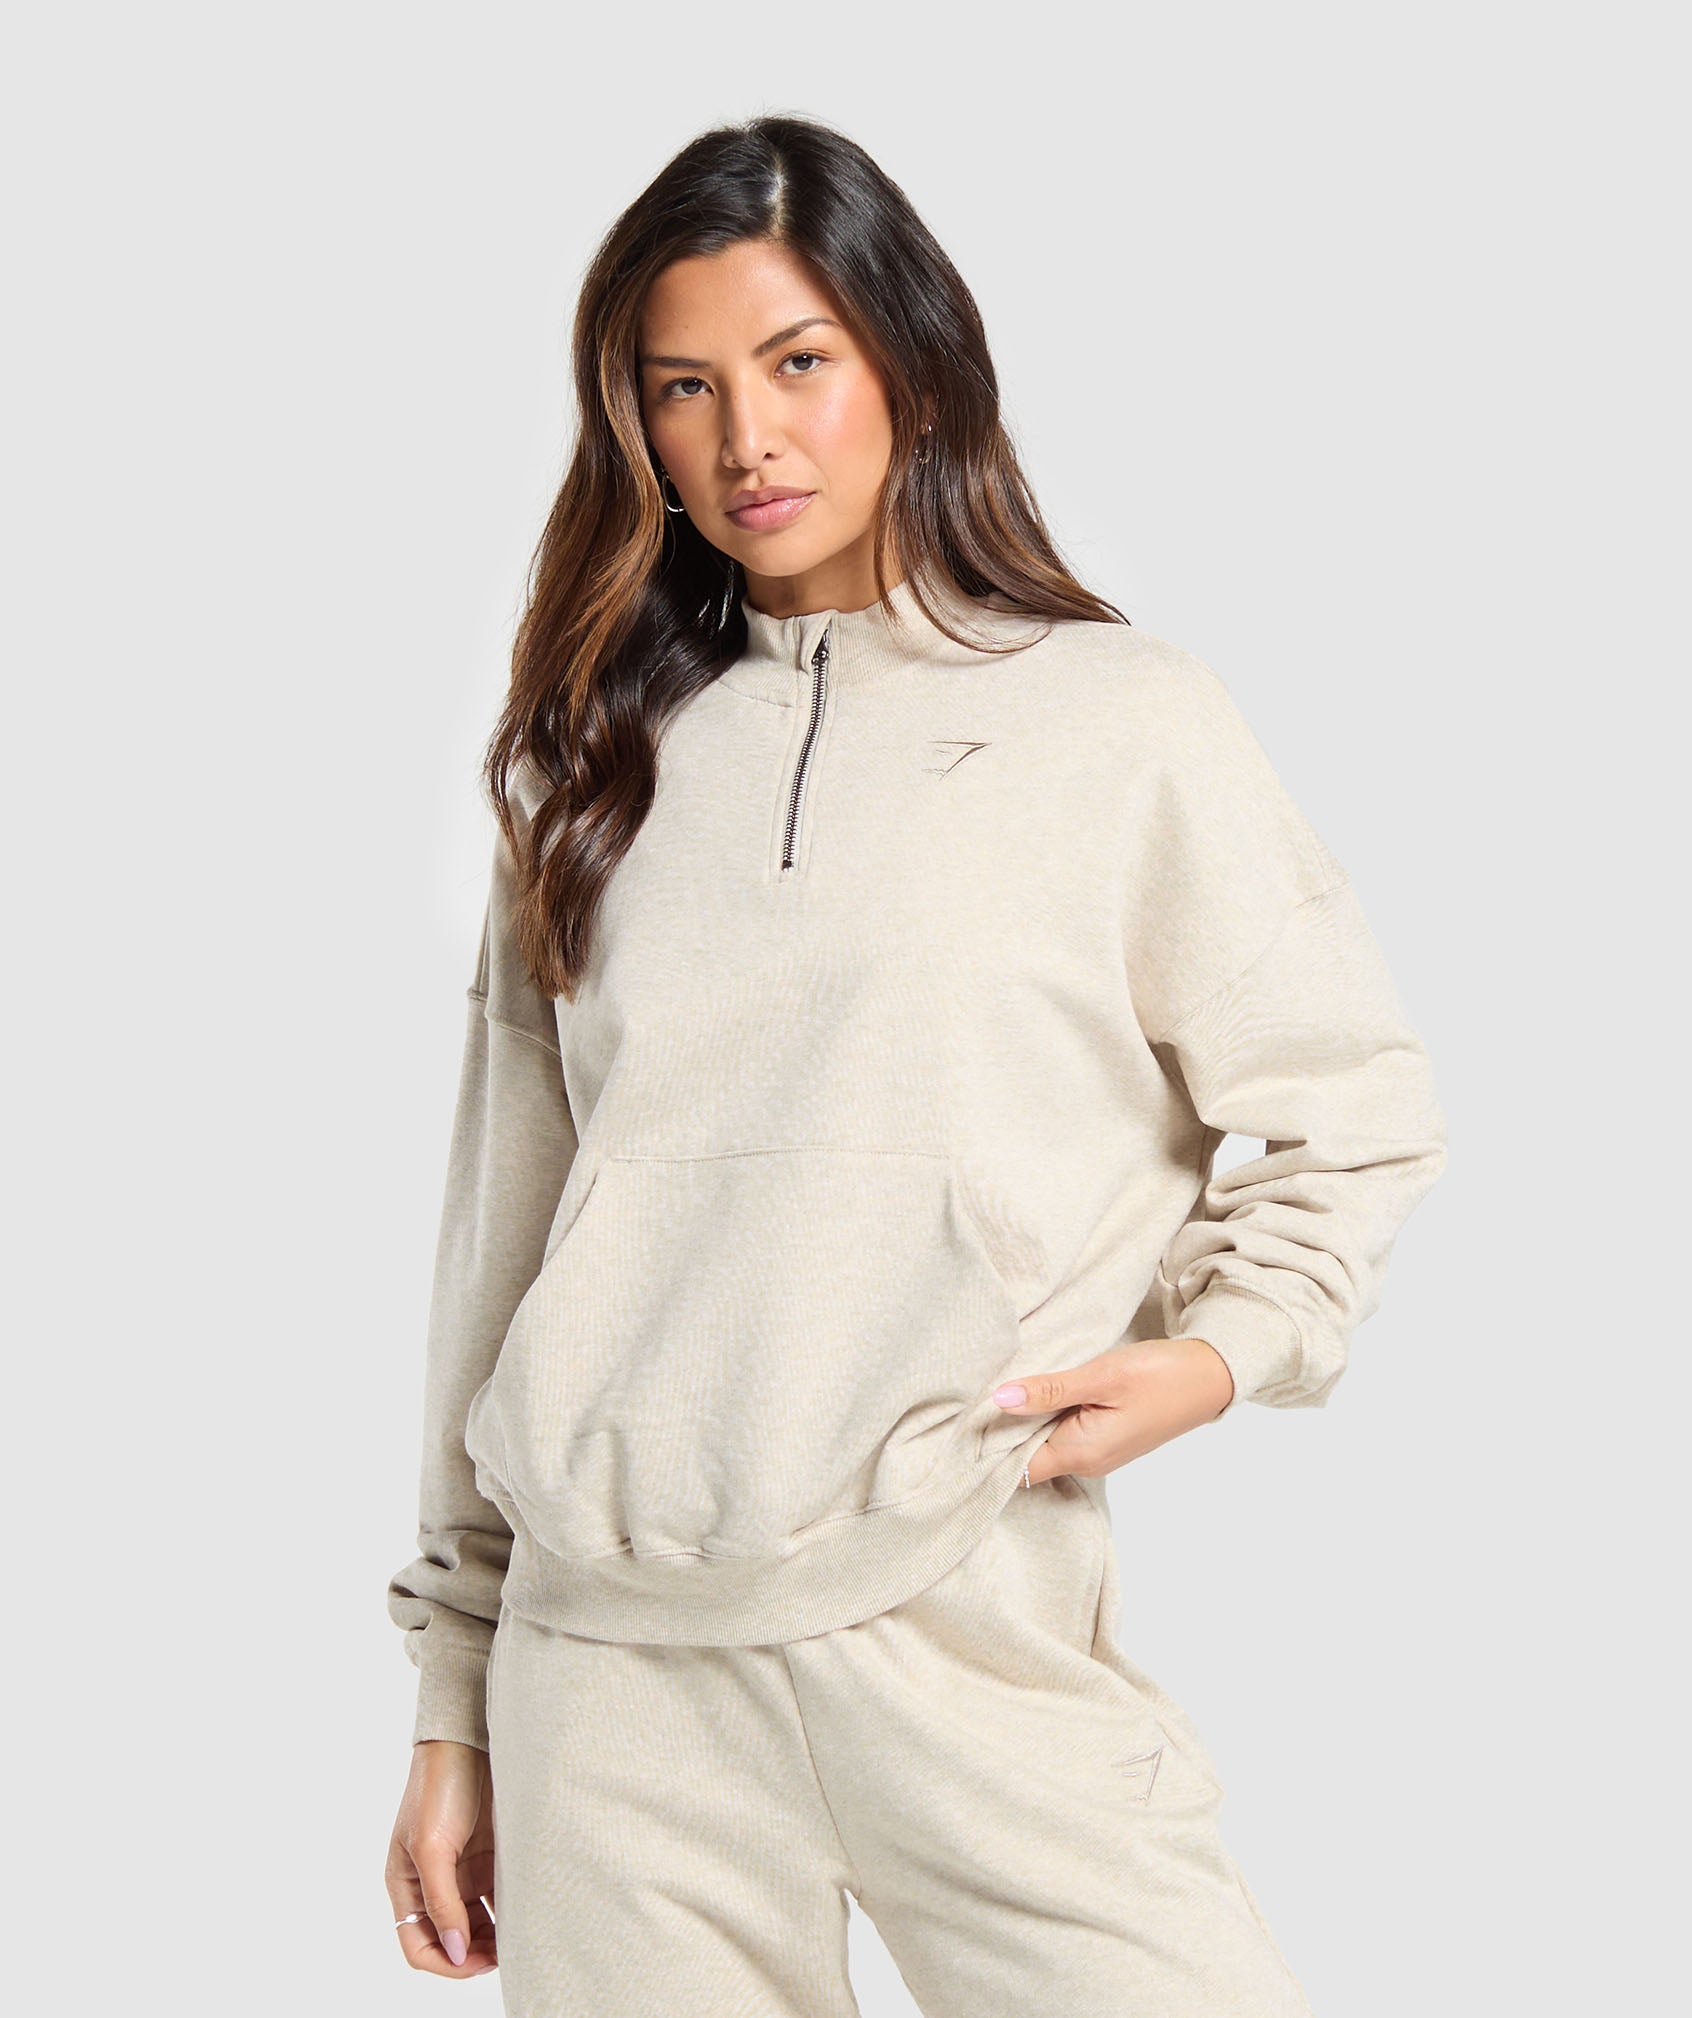 Rest Day Sweats 1/2 Zip Pullover in {{variantColor} is out of stock